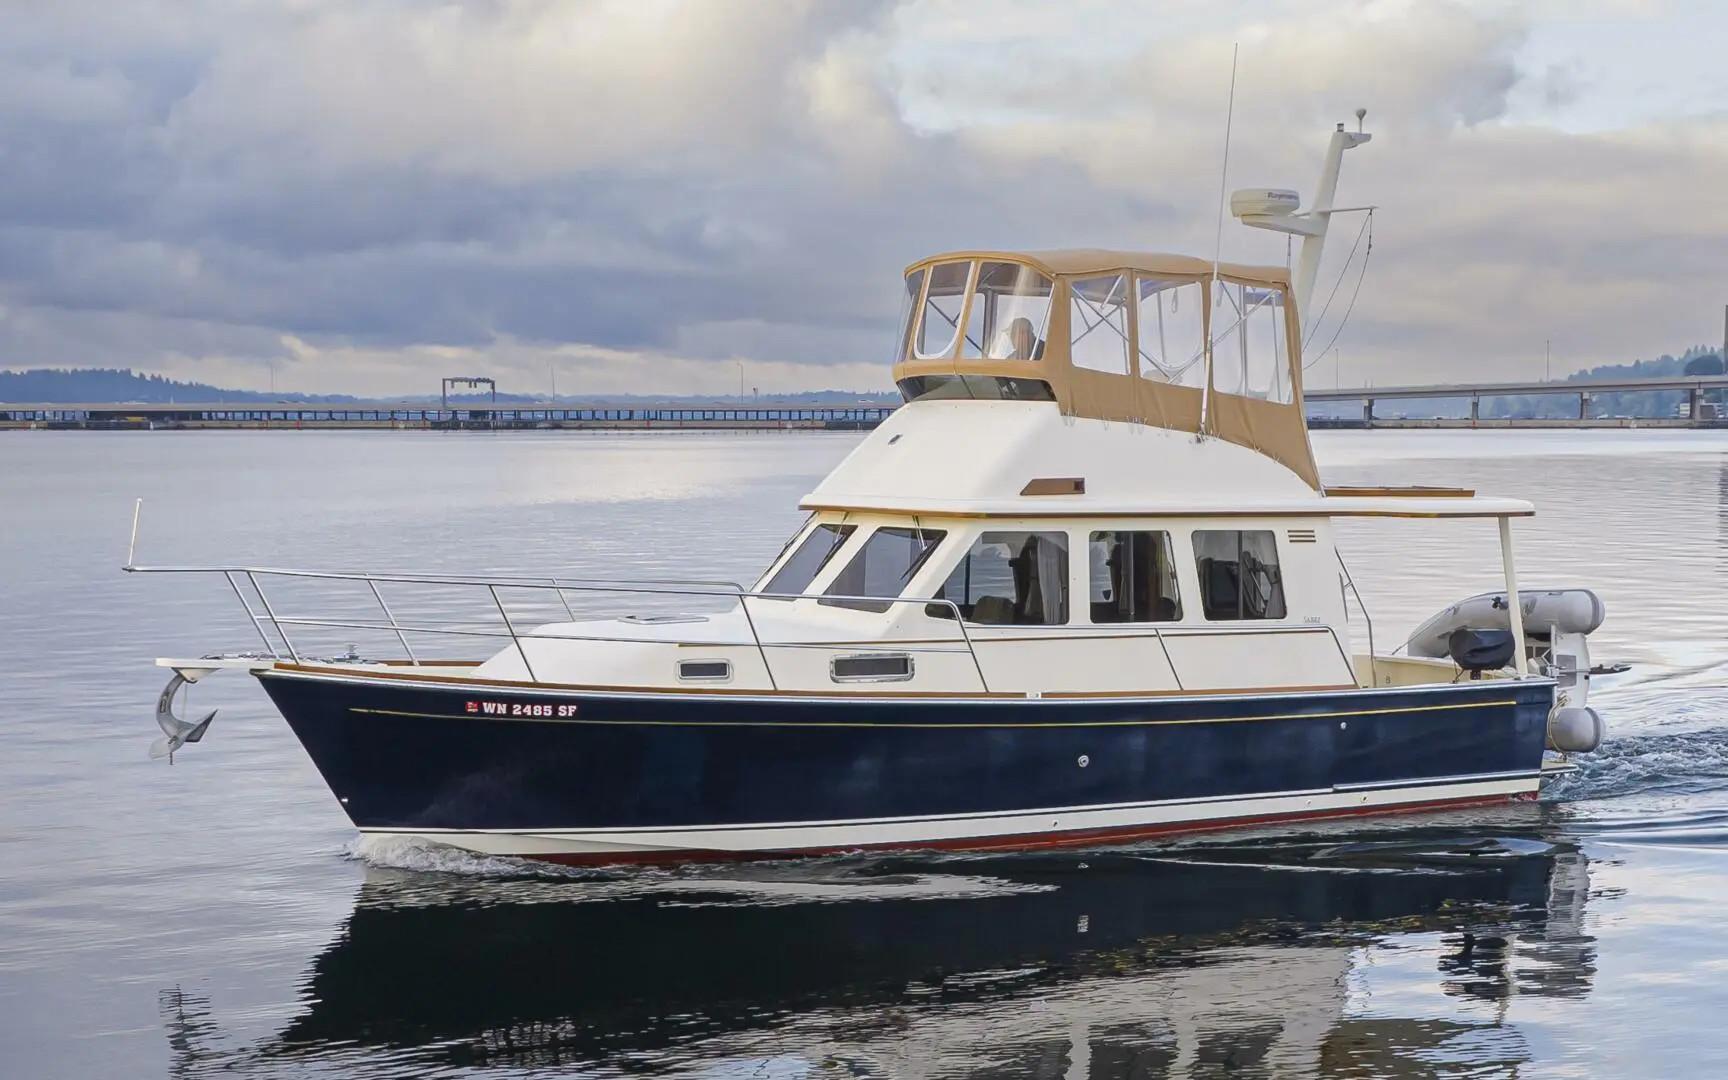 The Sabreline 36 Express MkII - A Traditional Style for a New time